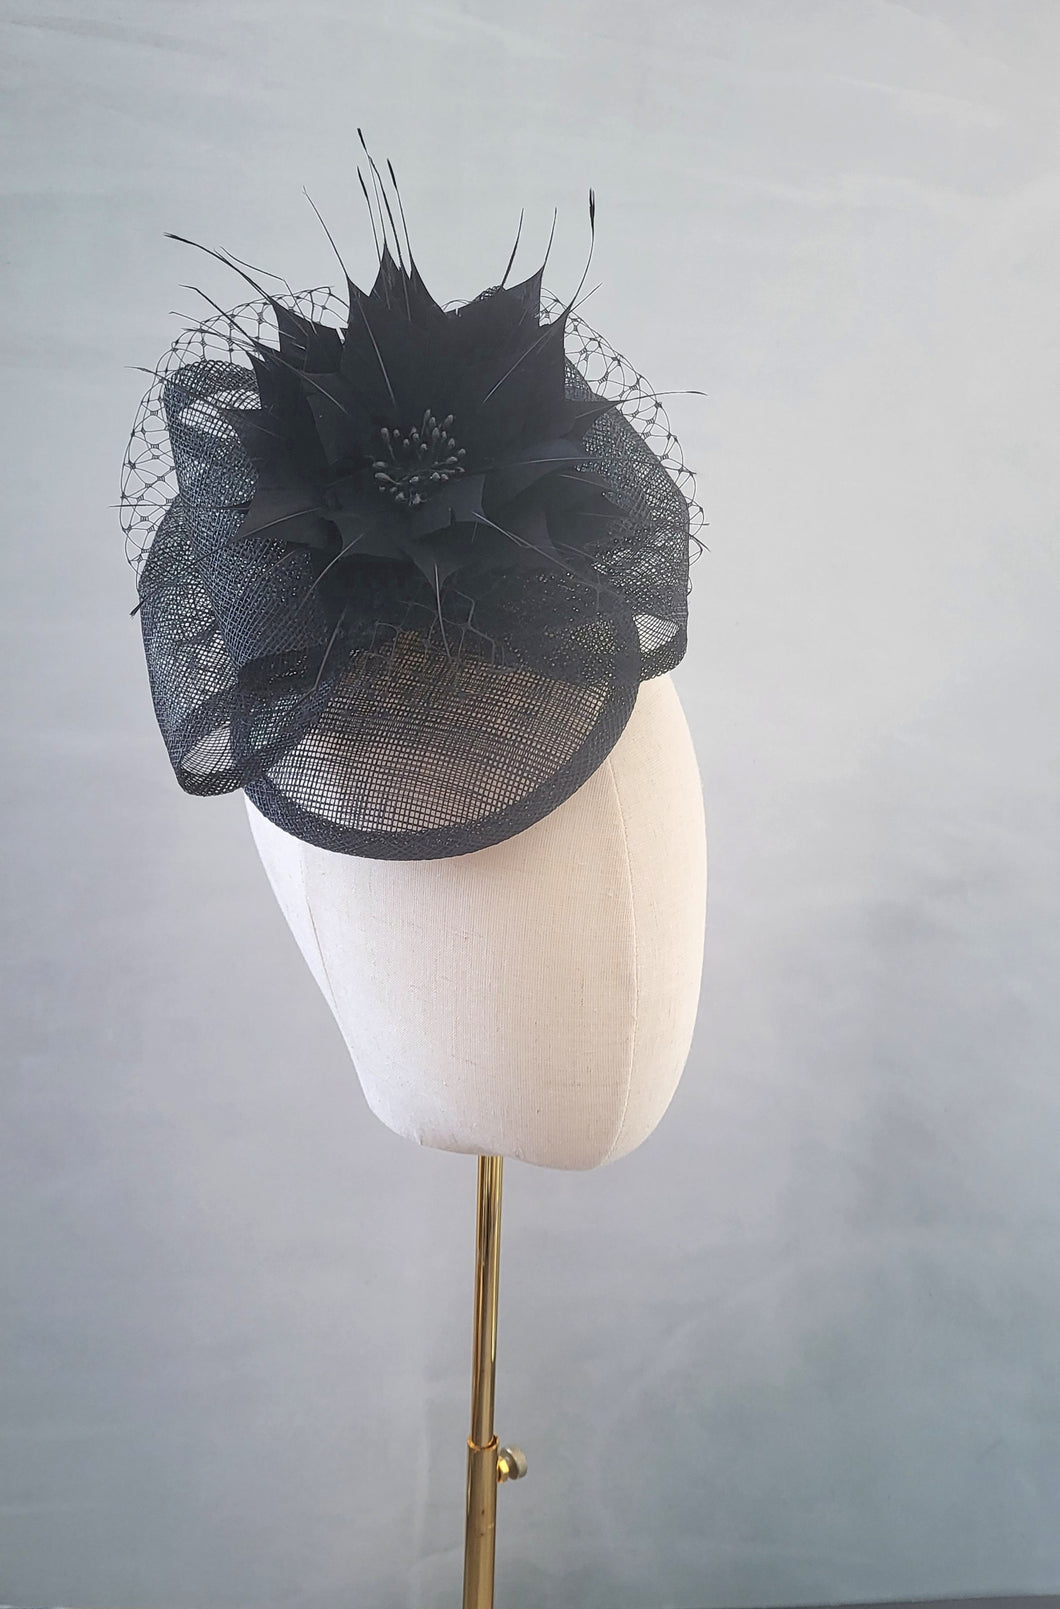 Black Bow Fascinator Hair Clip, With Feather Star Flower and Veiling